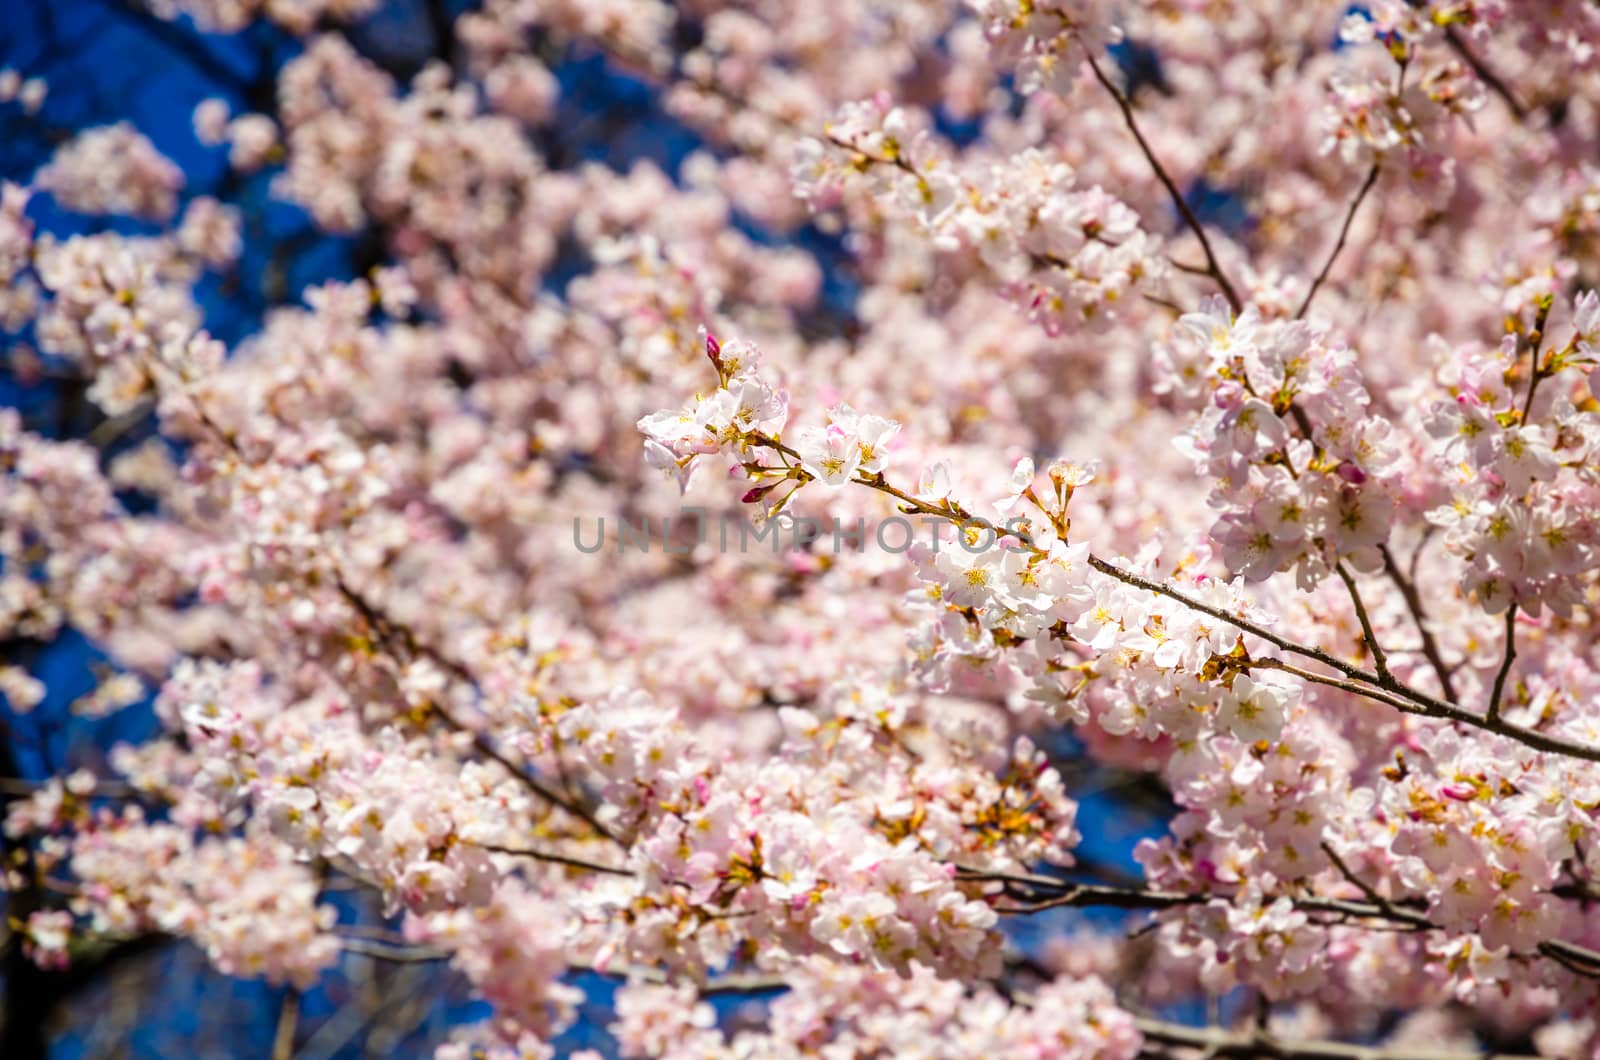 Close up of a cherry tree in full bloom in Central Park, New York, USA by mauricallari